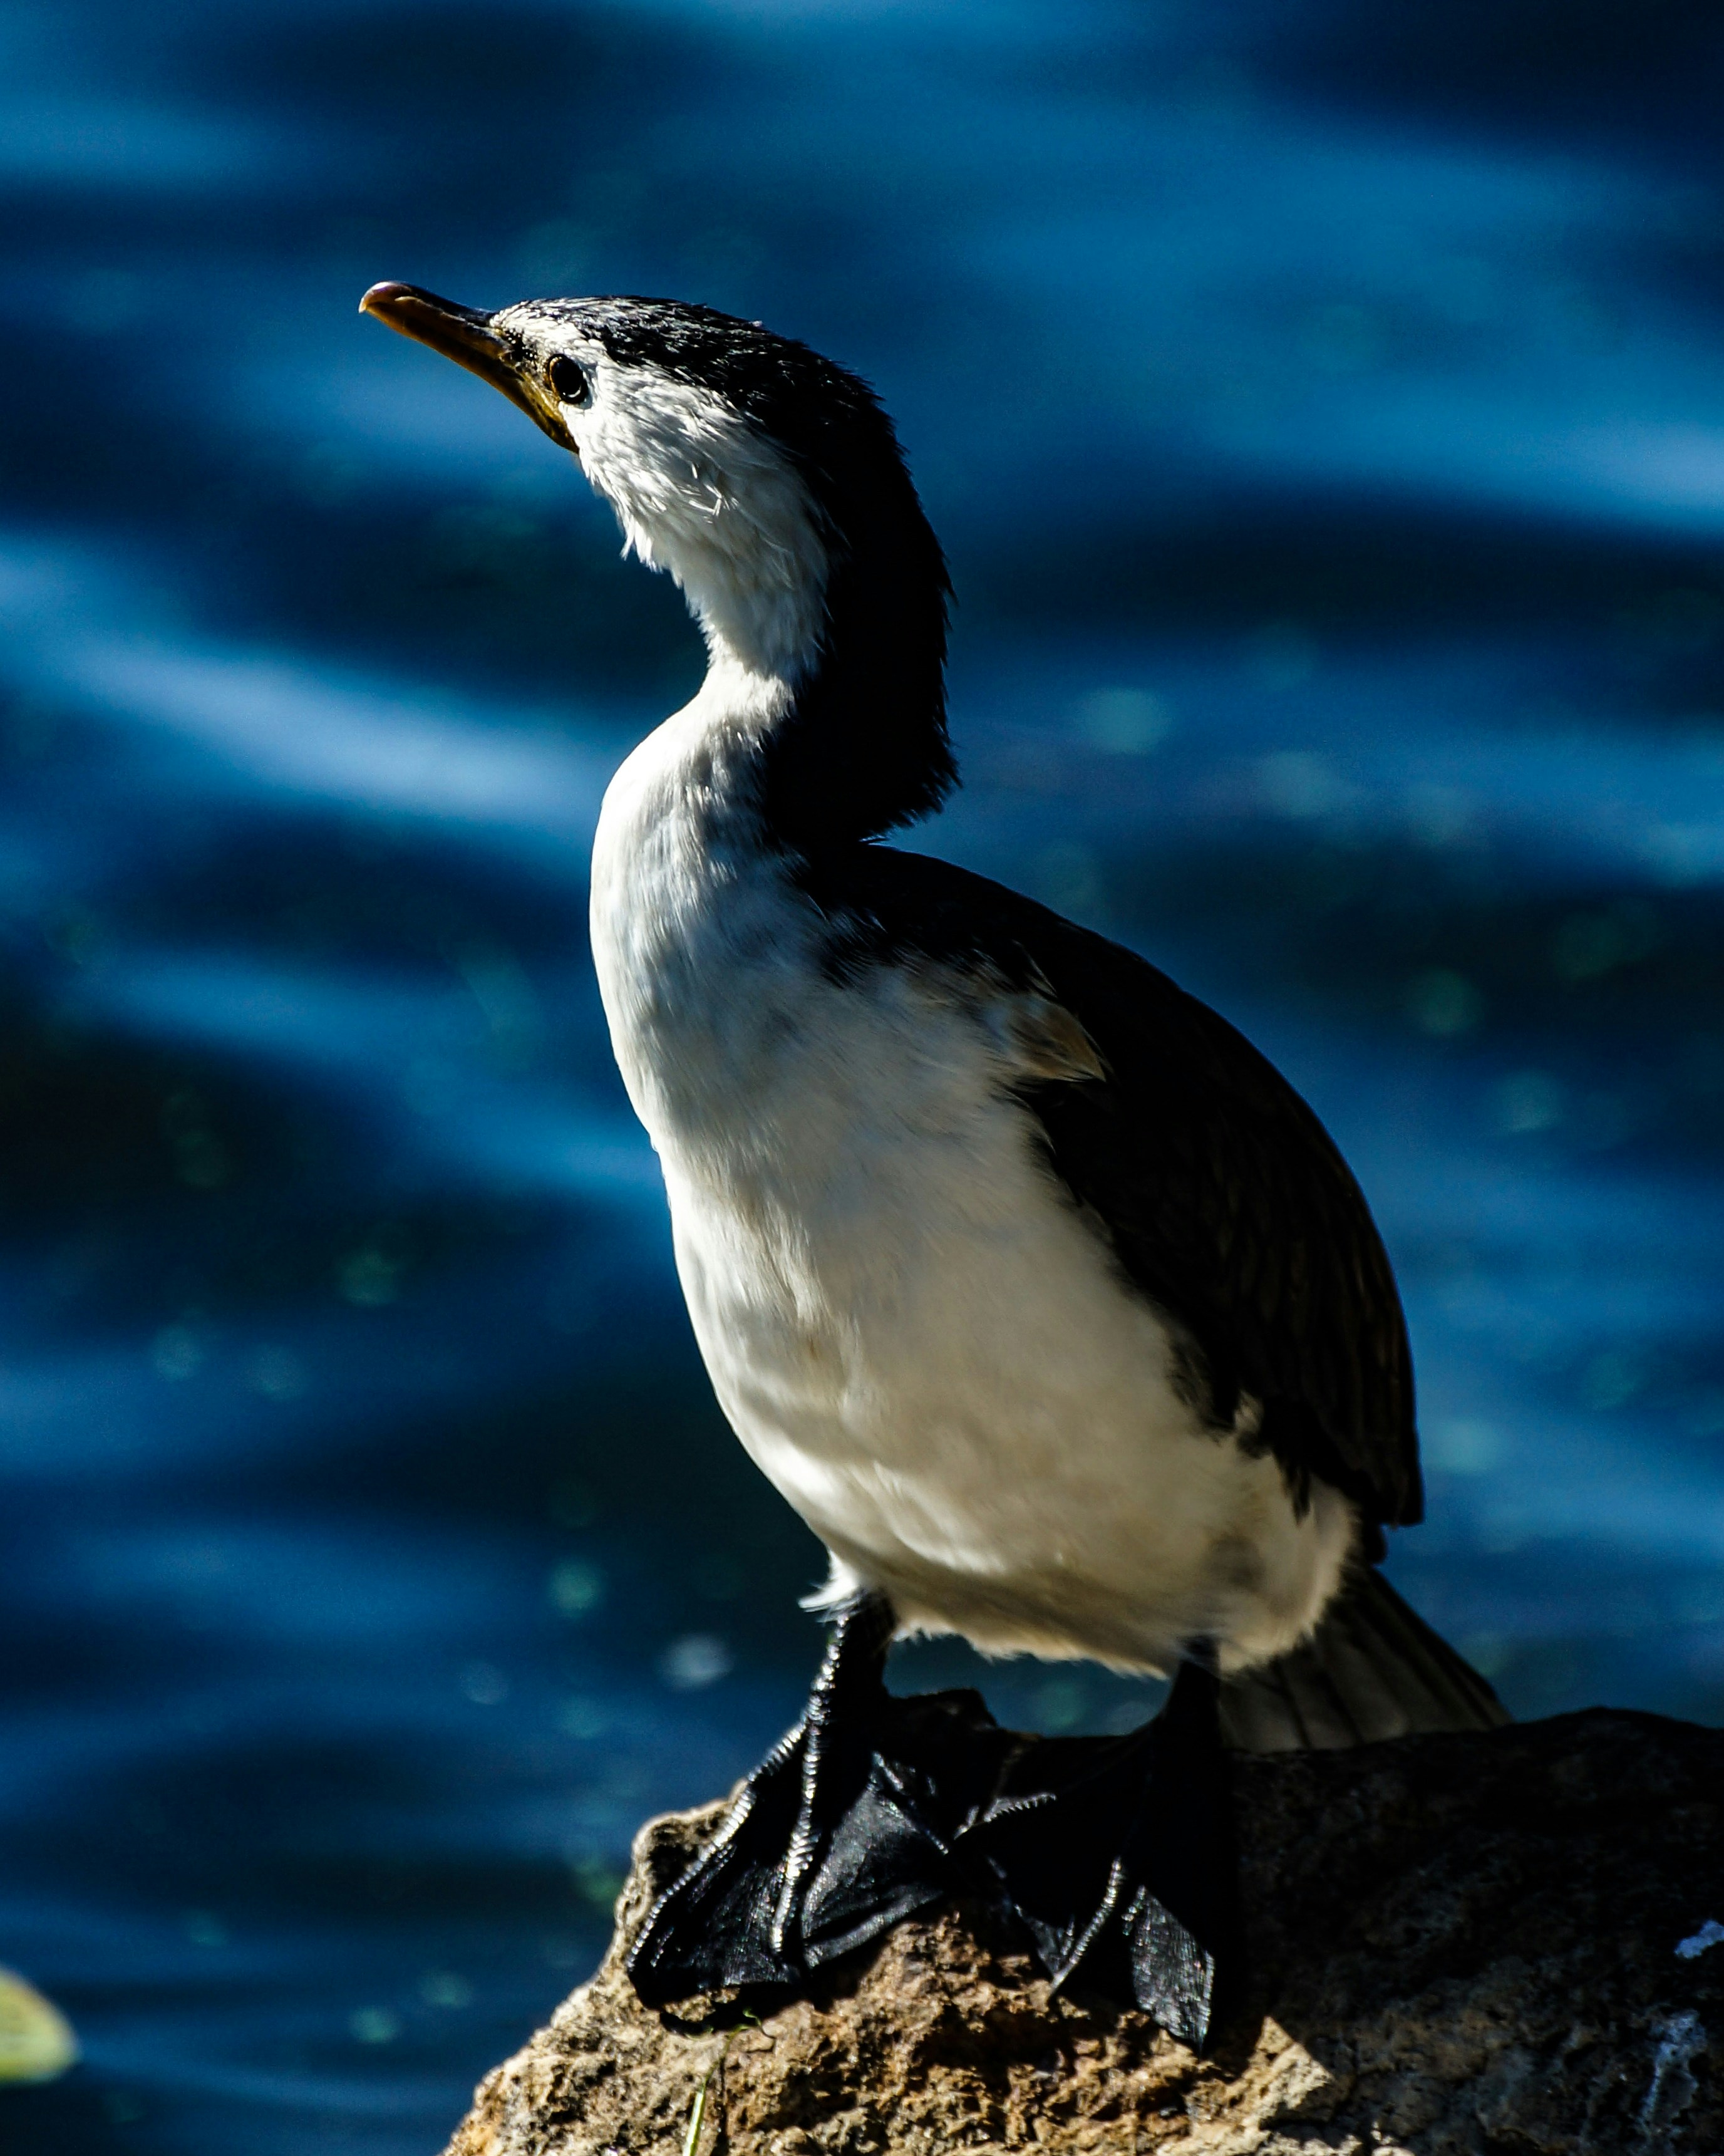 close up photo white and black bird standing on rock